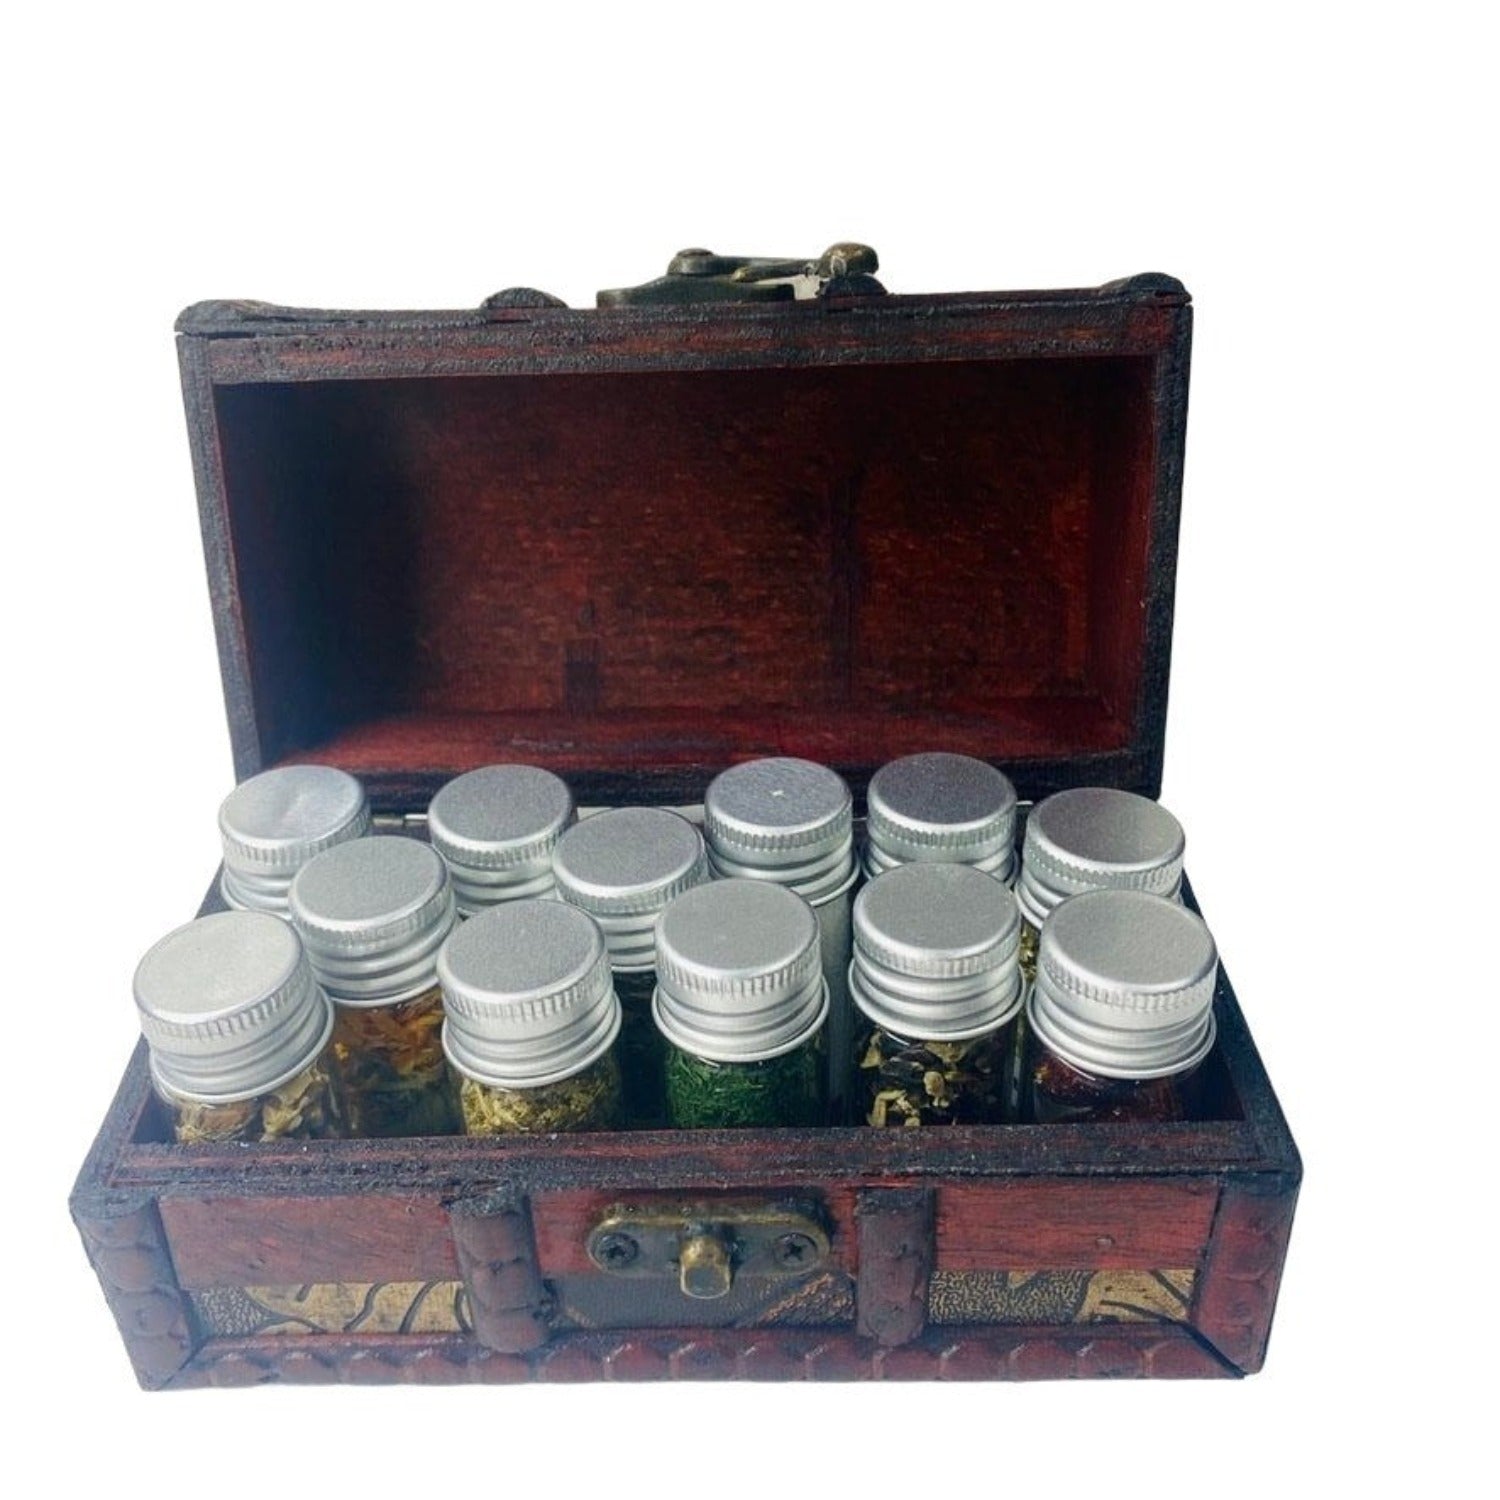 Apothecary Witchcraft Starter Kit Box